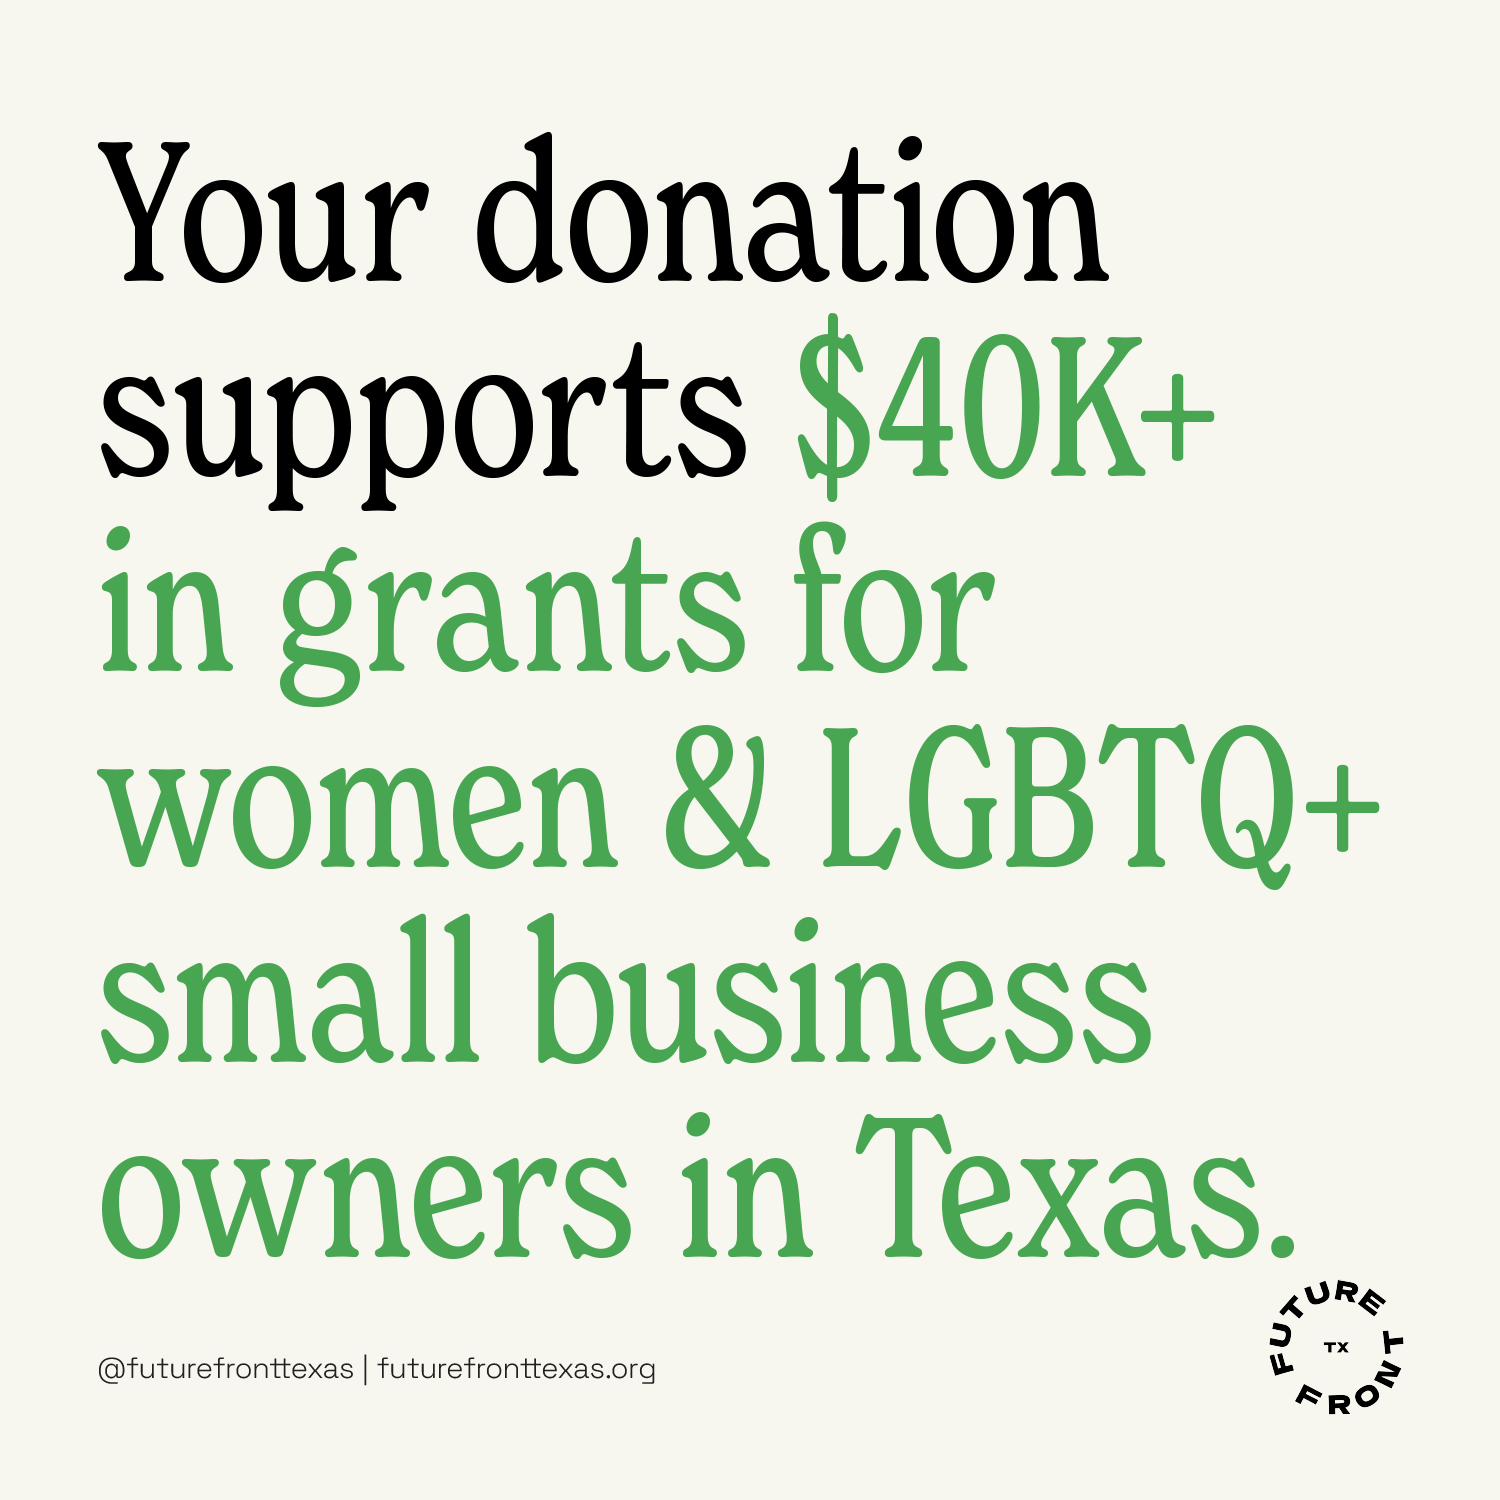 givingtuesday_fftx2021-2.png